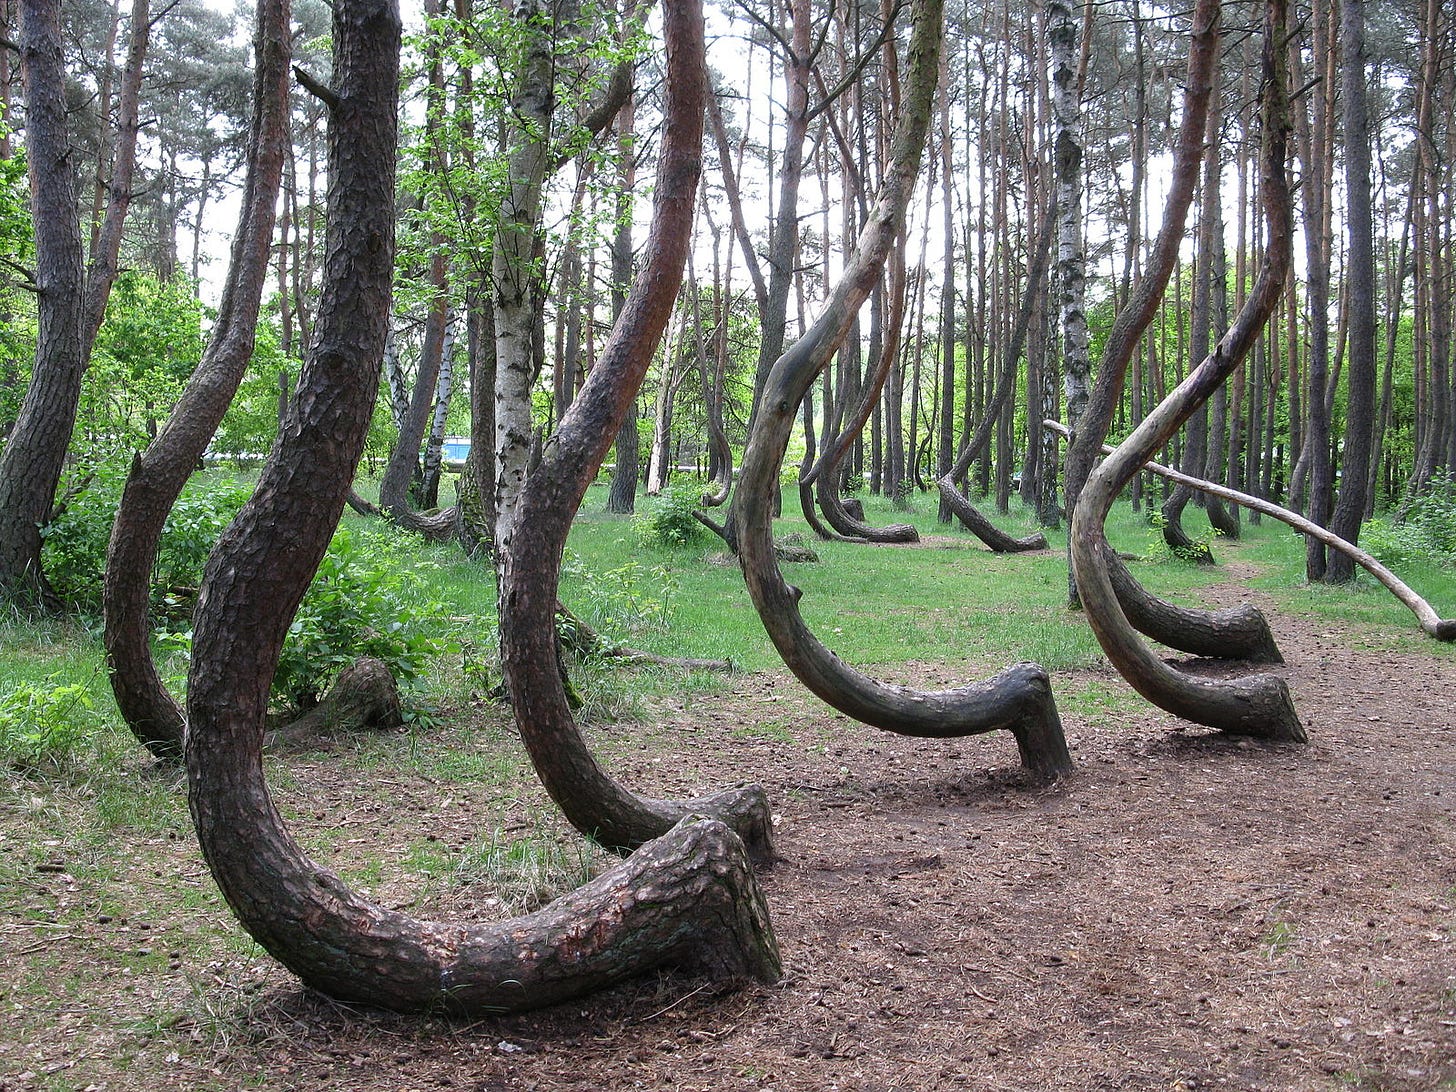 Pine trees, all in a strange curved shape.